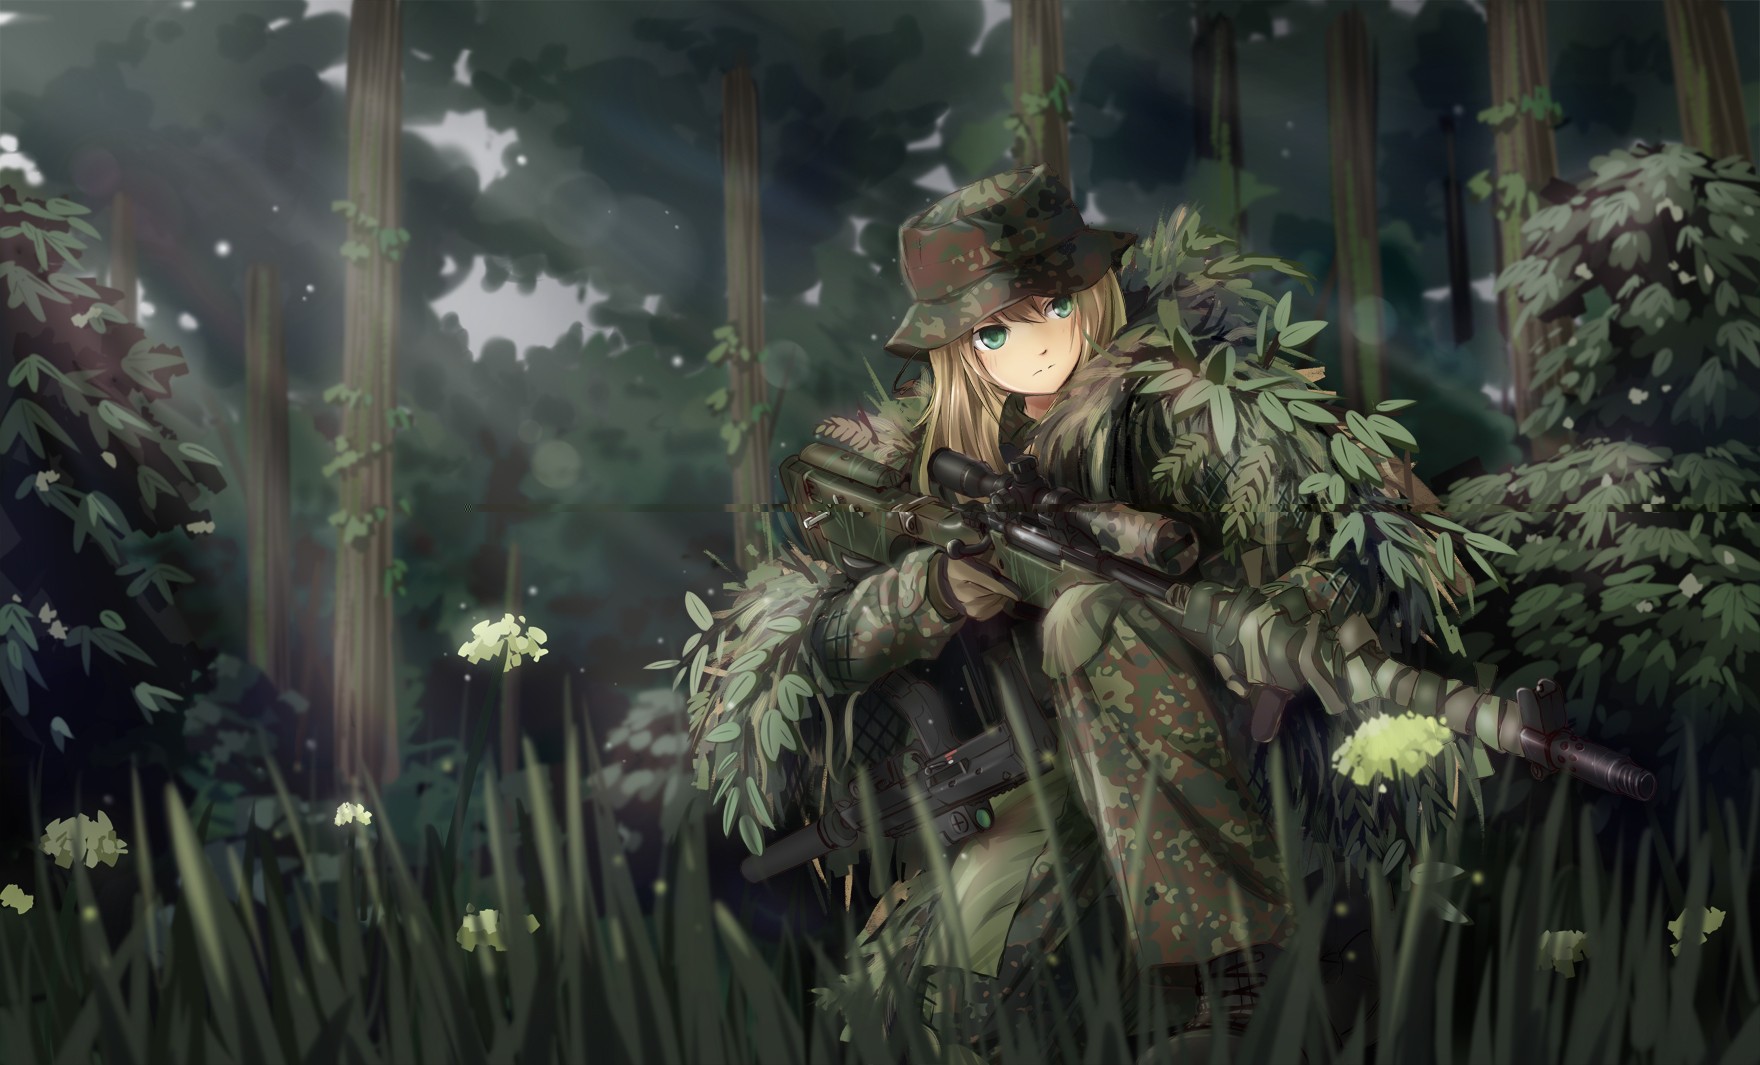 TC1995, Original Characters, Soldier, Anime, Anime Girls, Military, Weapon, Camouflage, Ghillie Suit, Sniper Rifle, Gun, MP7, Forest, Fantasy Art, Manga Wallpaper